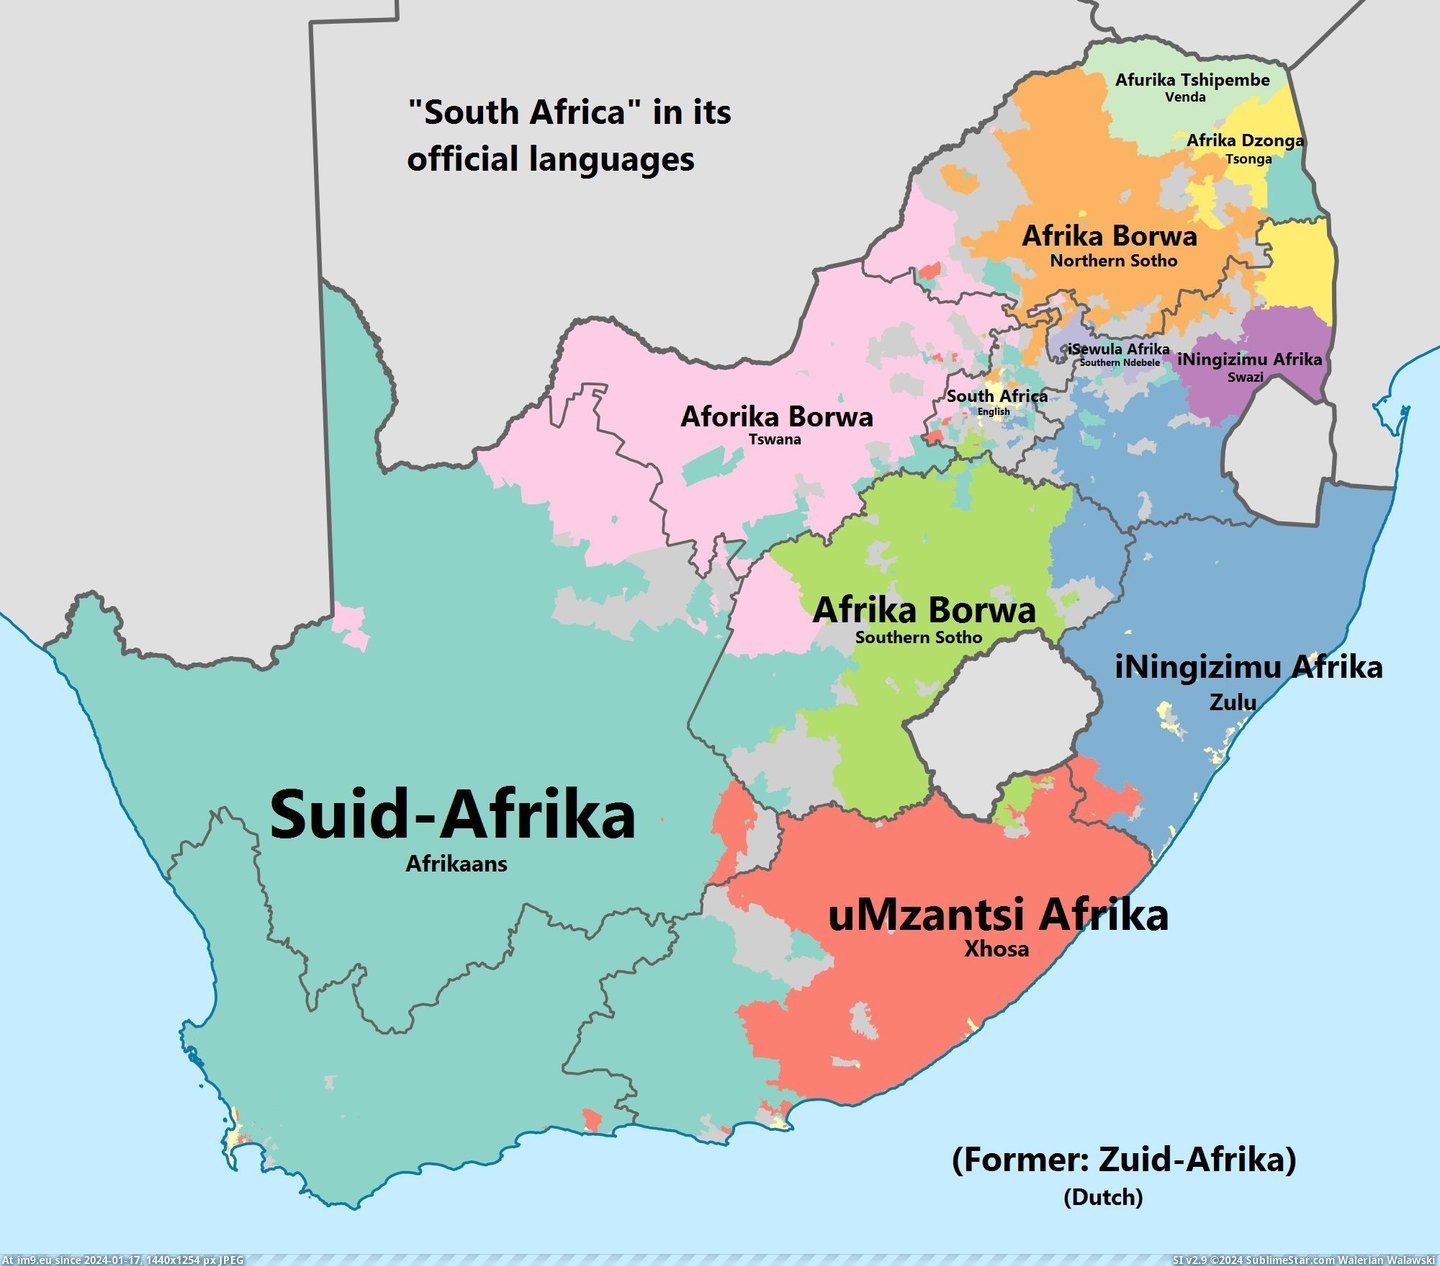 [Mapporn] 'South Africa' in its official languages [2000x1753] (in My r/MAPS favs)